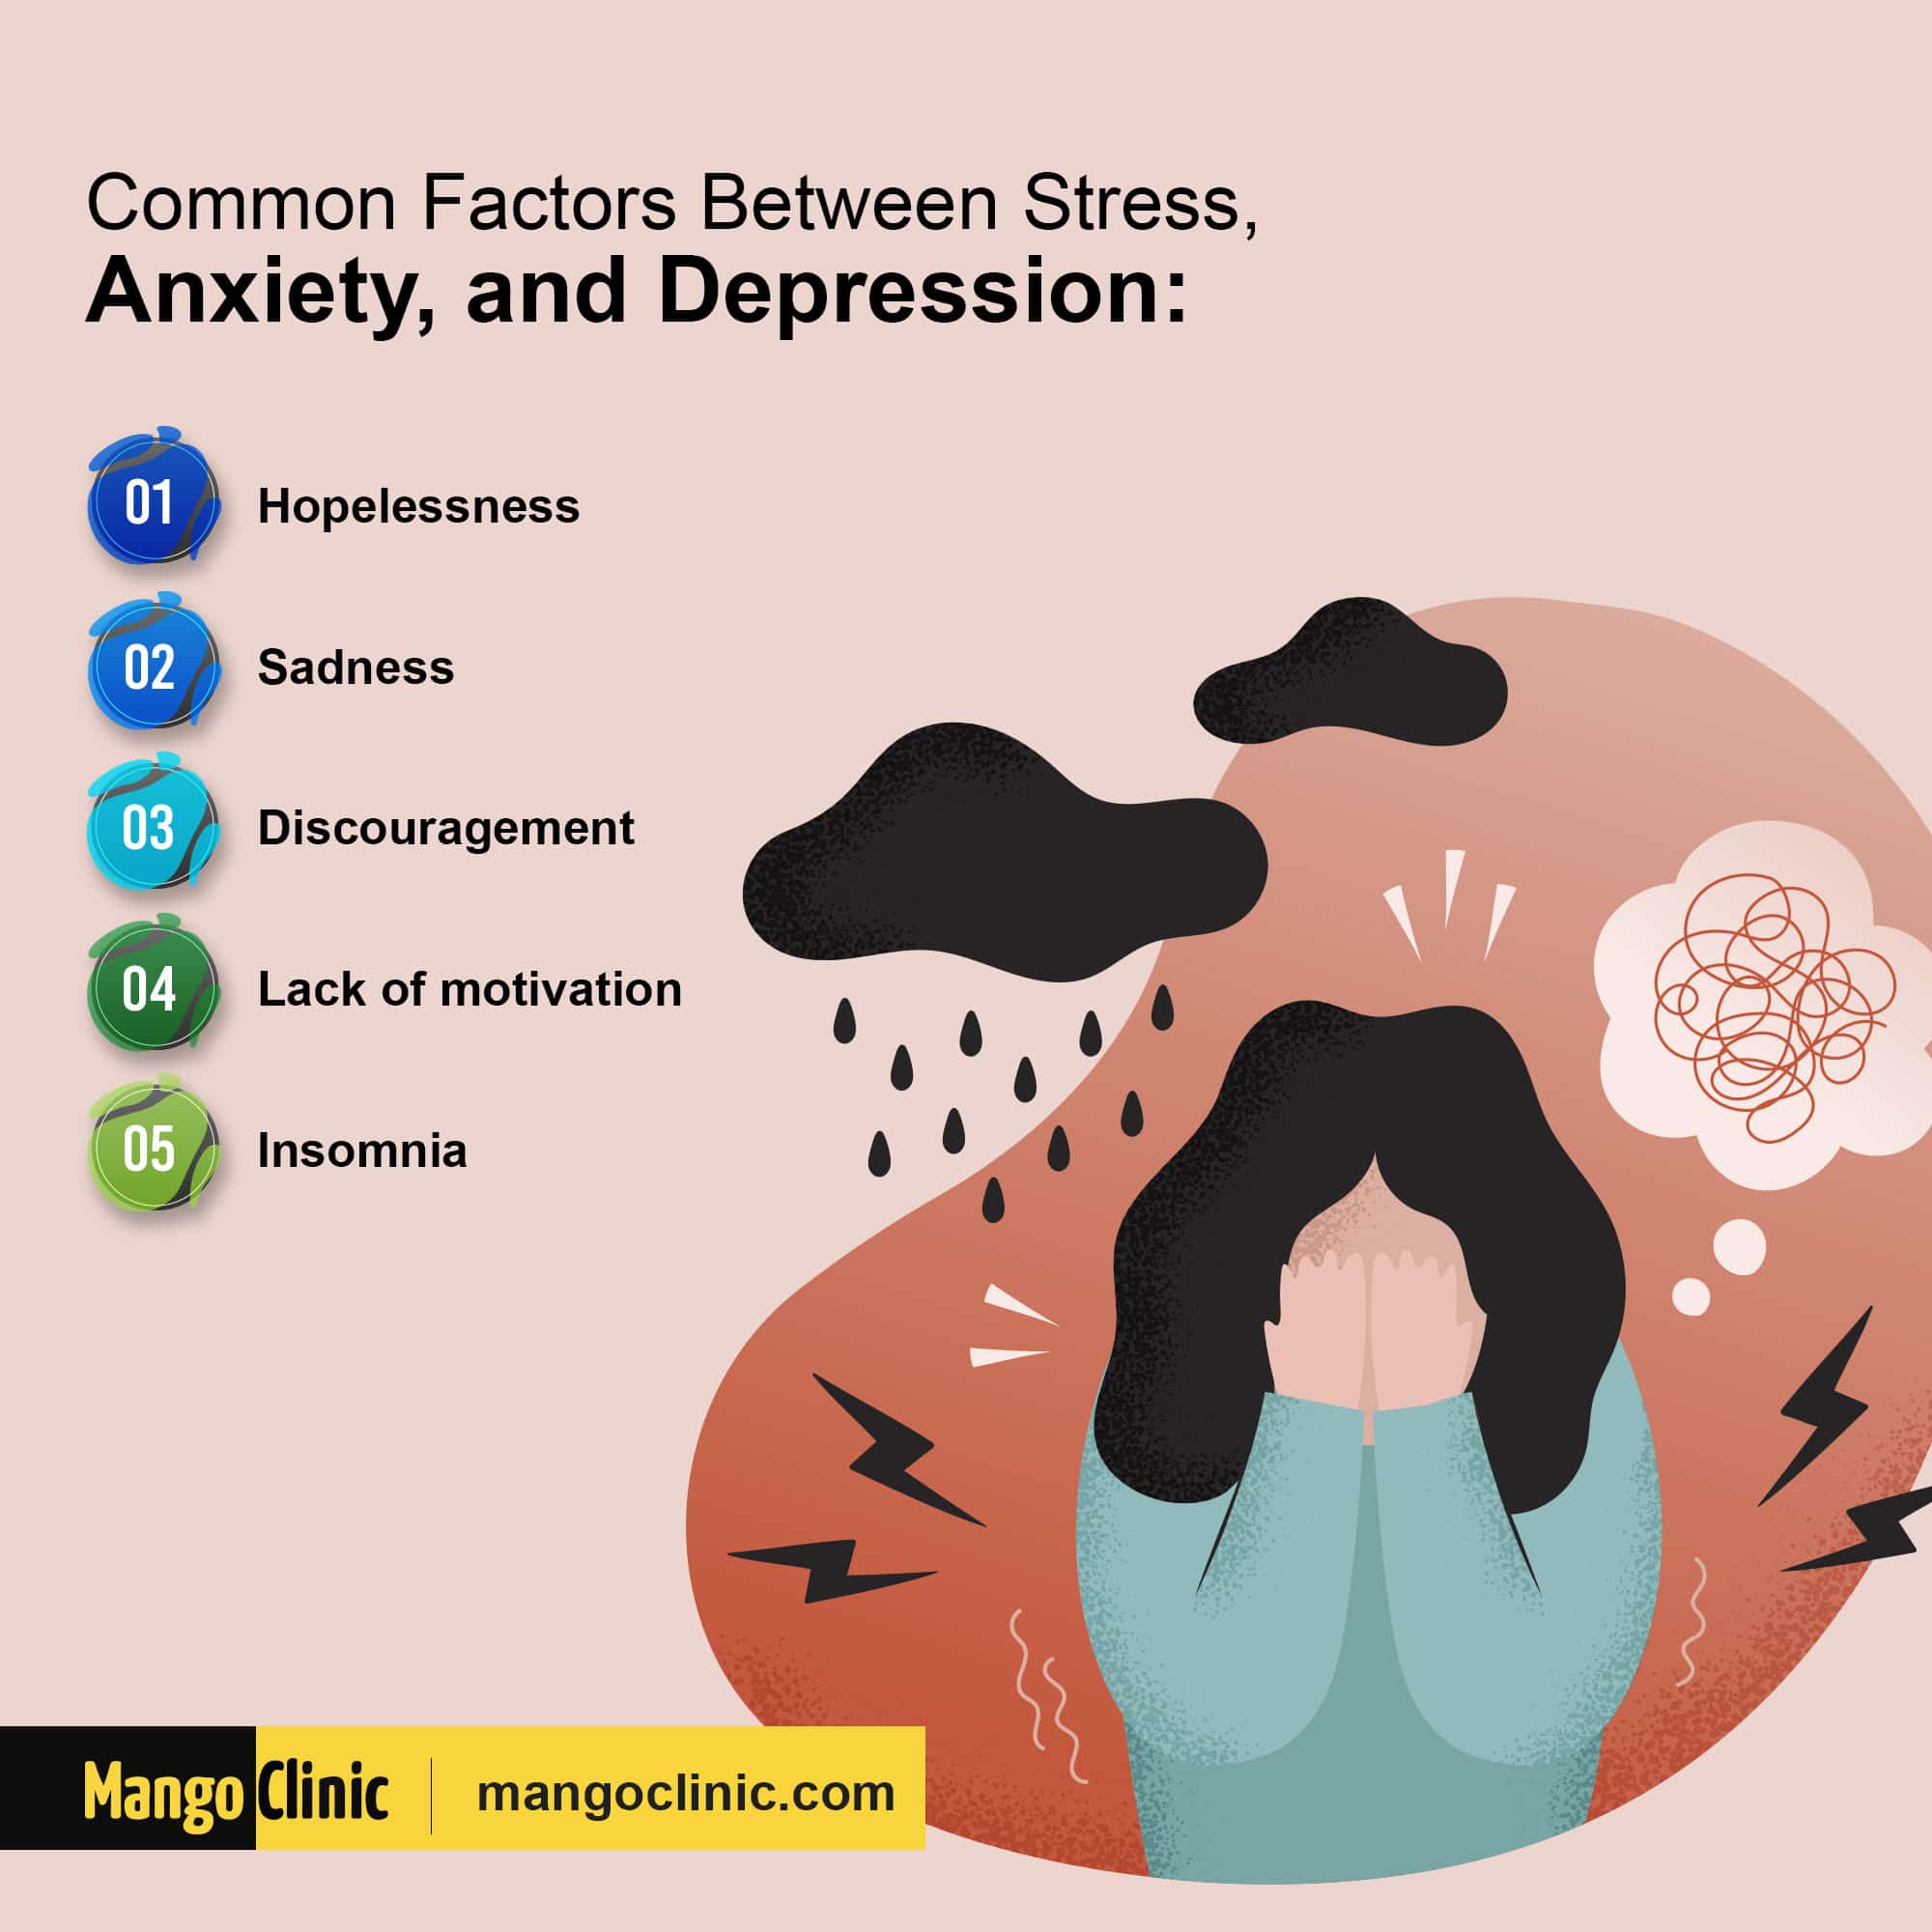 Stress, Anxiety, Depression: Treatment Begins with the Correct Diagnosis